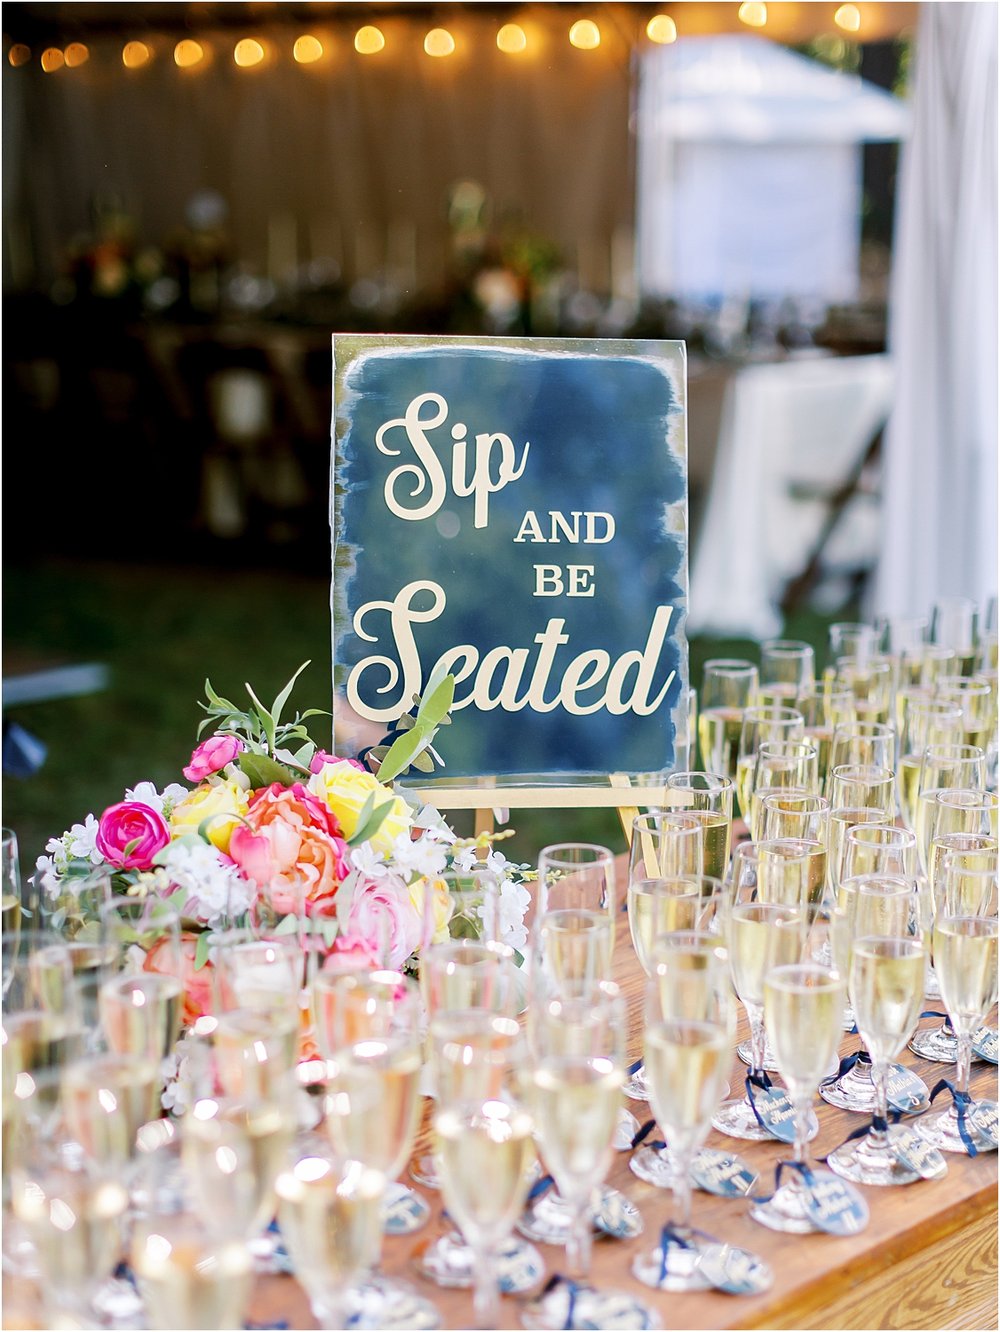 Sip and Be Seated wedding sign